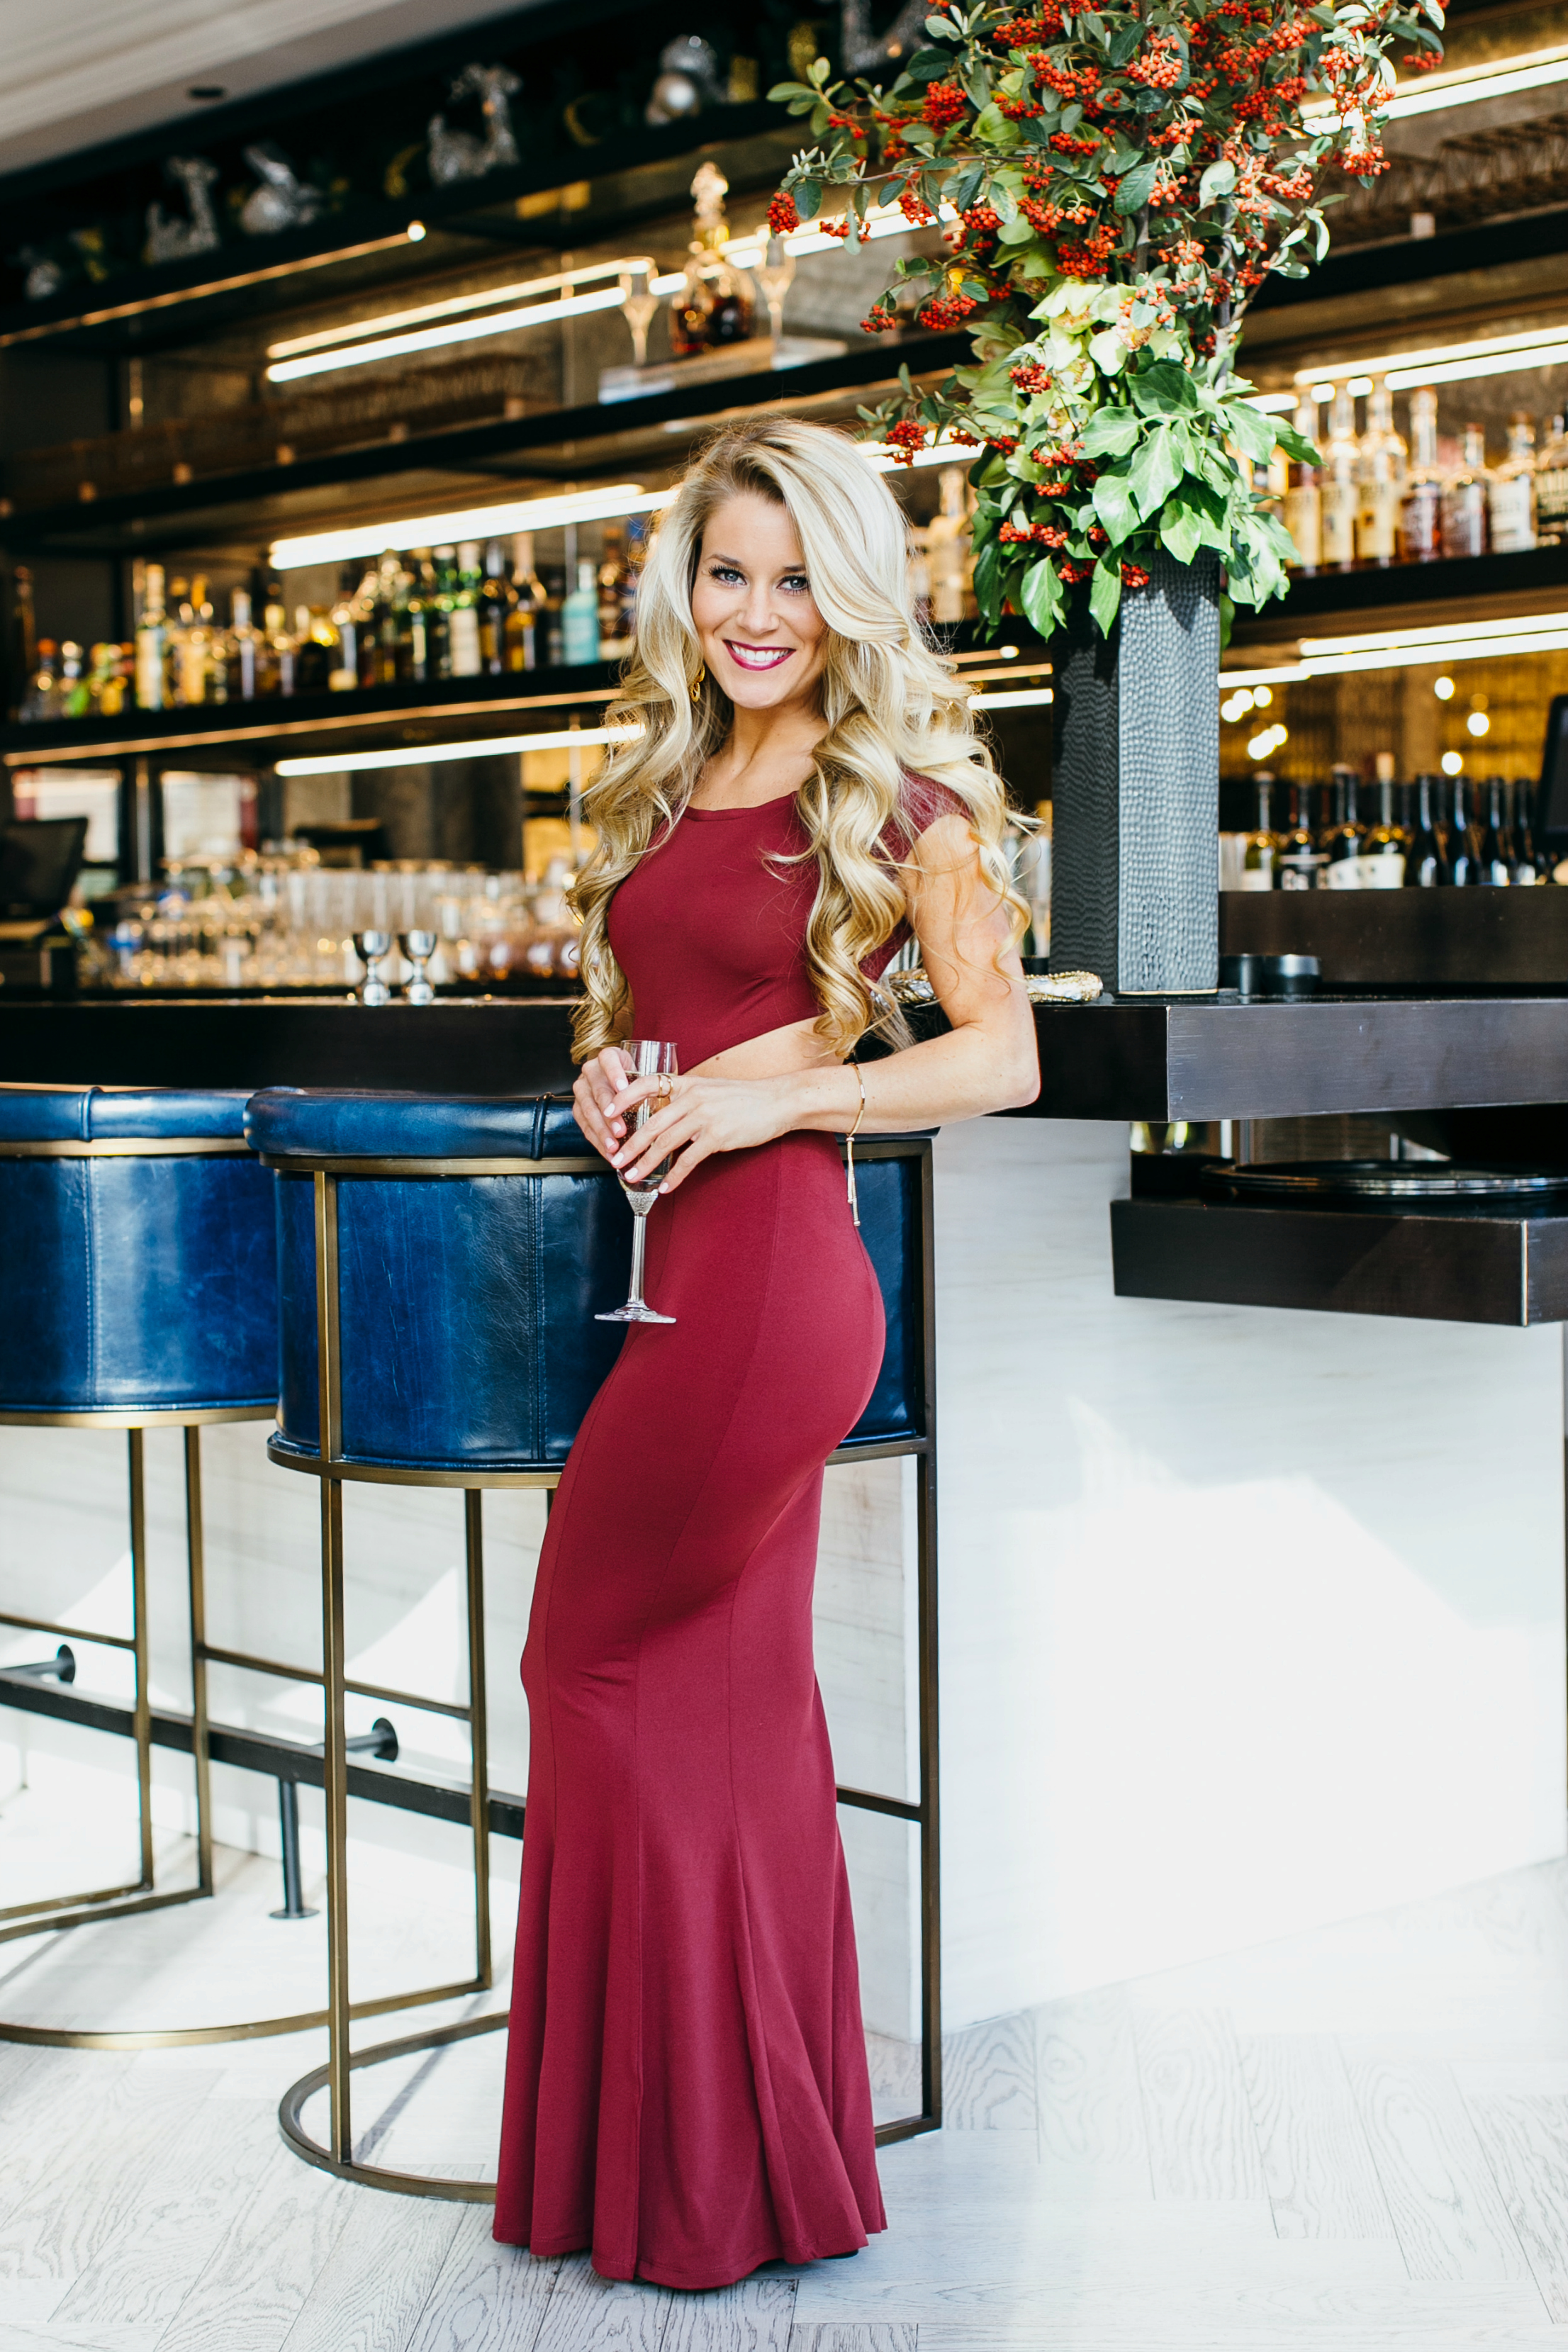 Glamorous Holiday Dress - Welcome to Olivia Rink